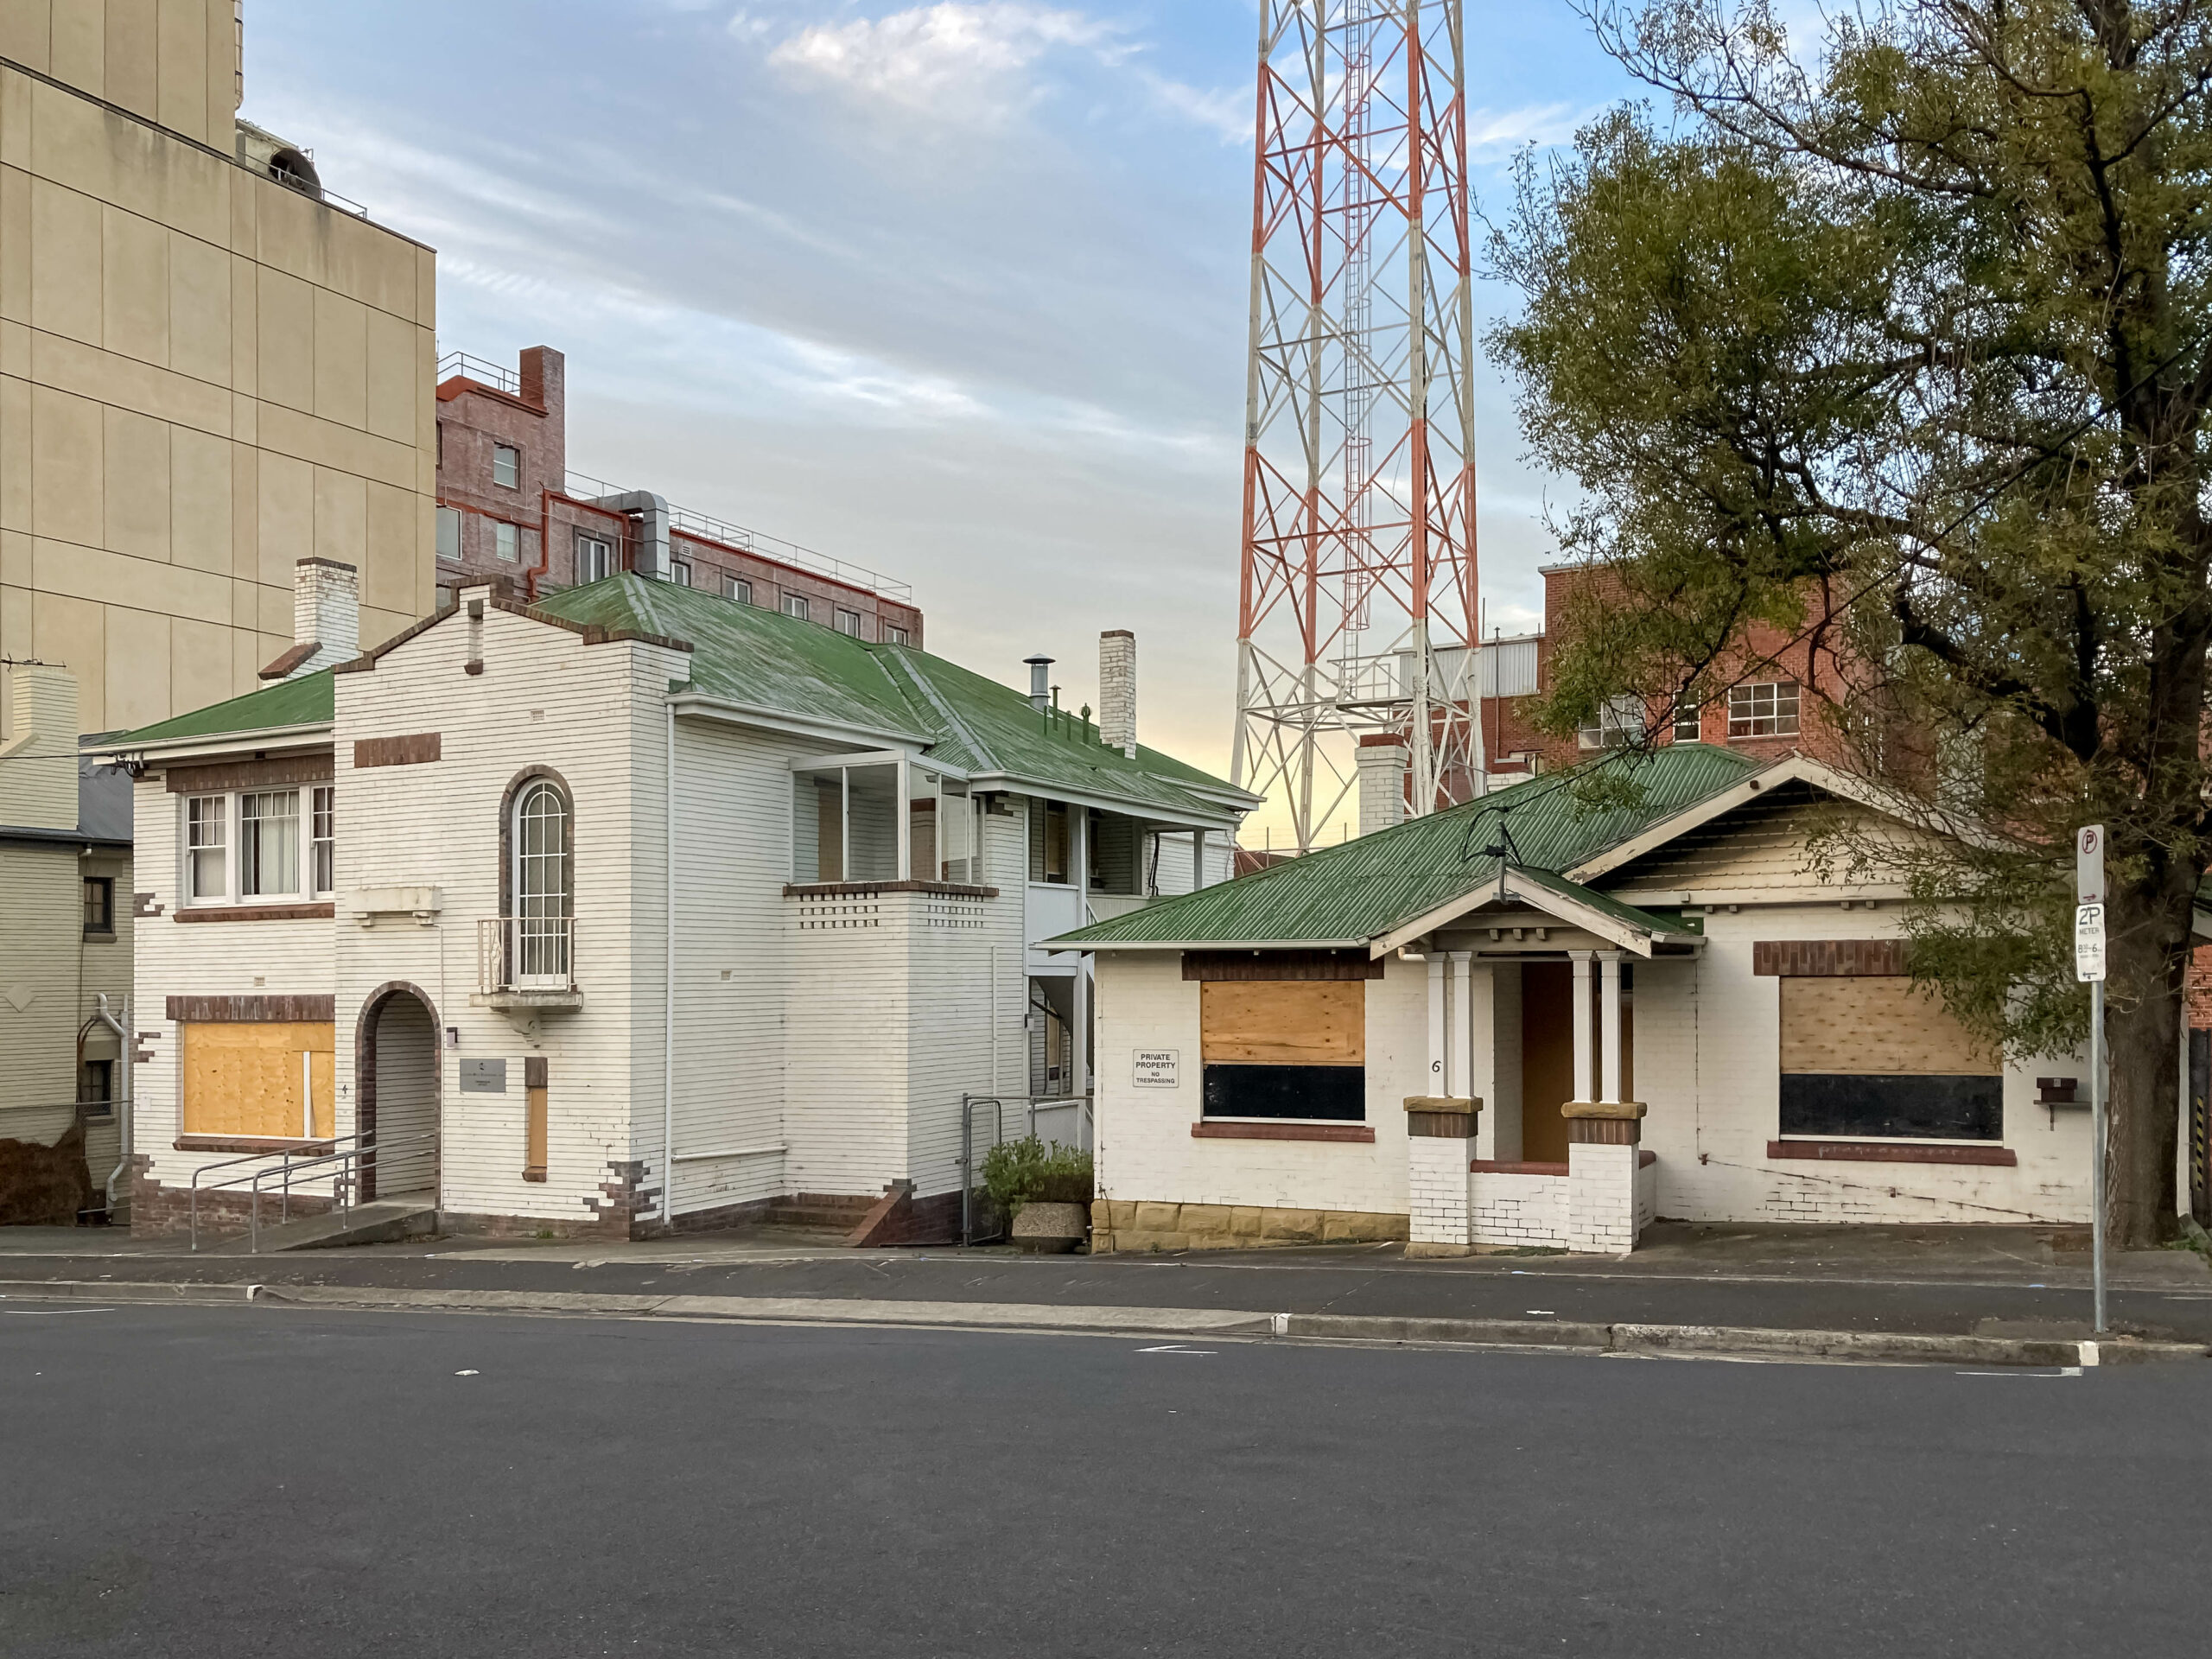 Two mid-20th century white houses with boarded up windows. They both have battered green roofs. The one on the left is weatherboard and is two storeys. The one on the right is single-storey brick.